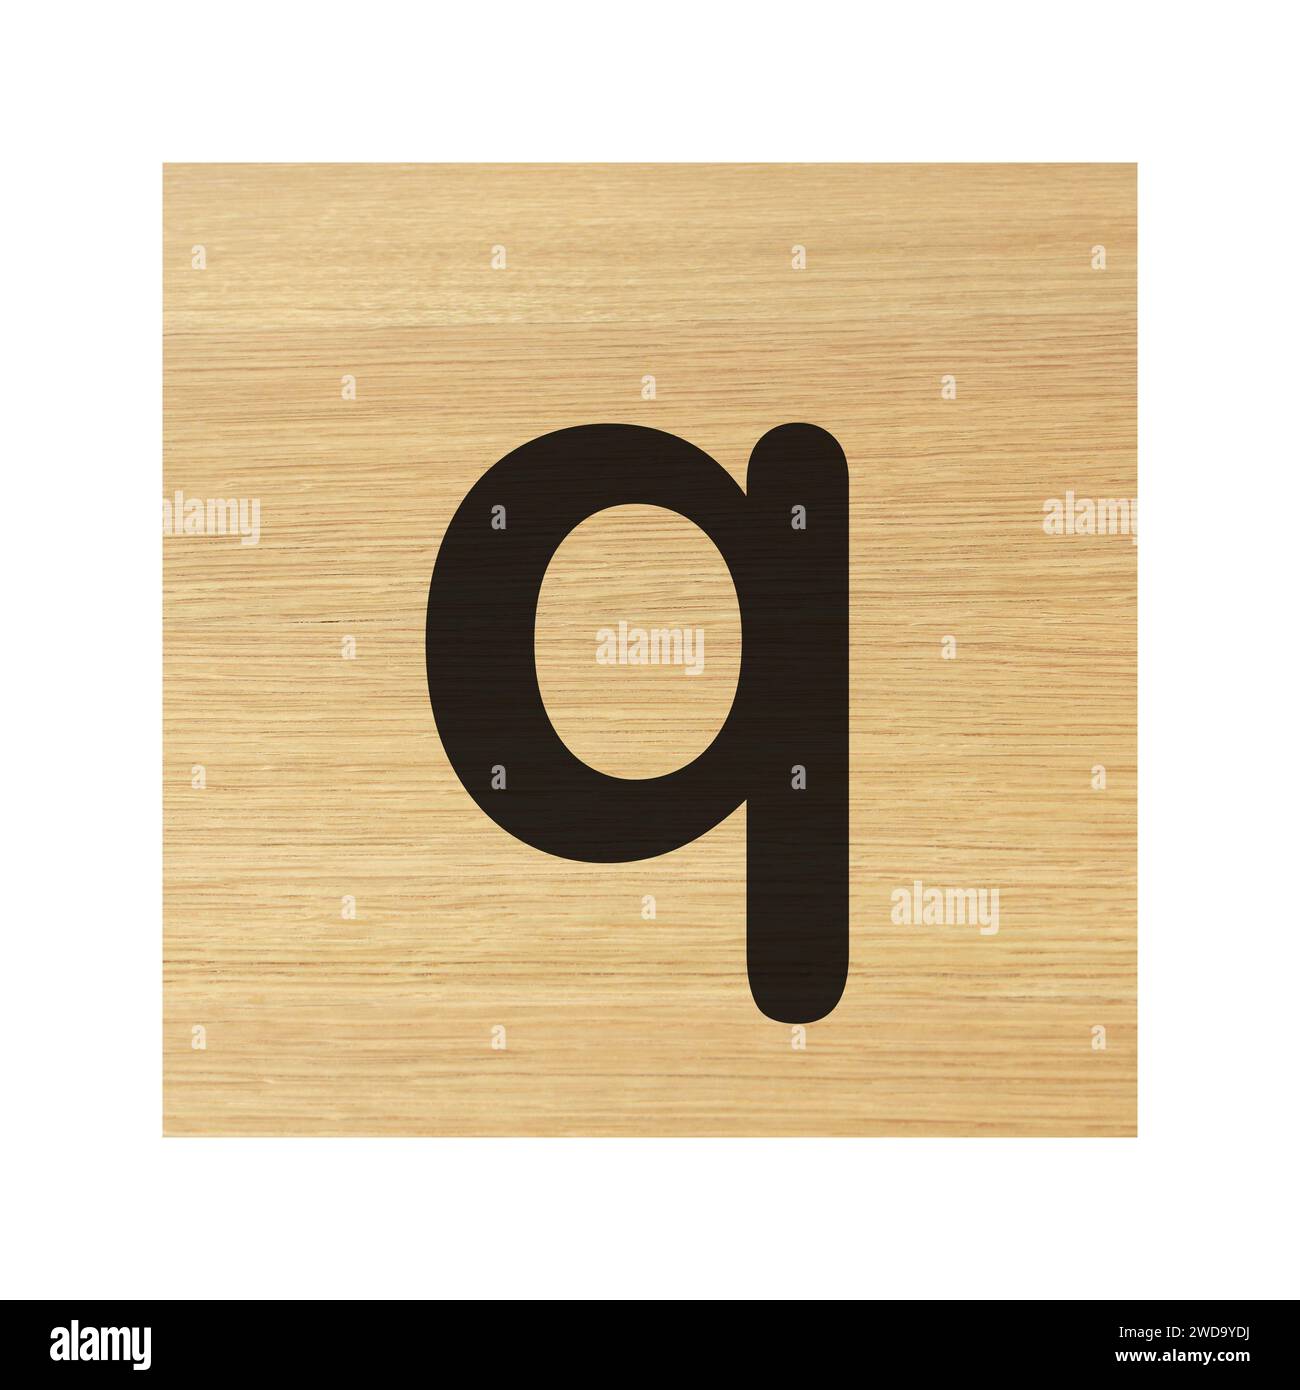 small q wood block on white with clipping path Stock Photo